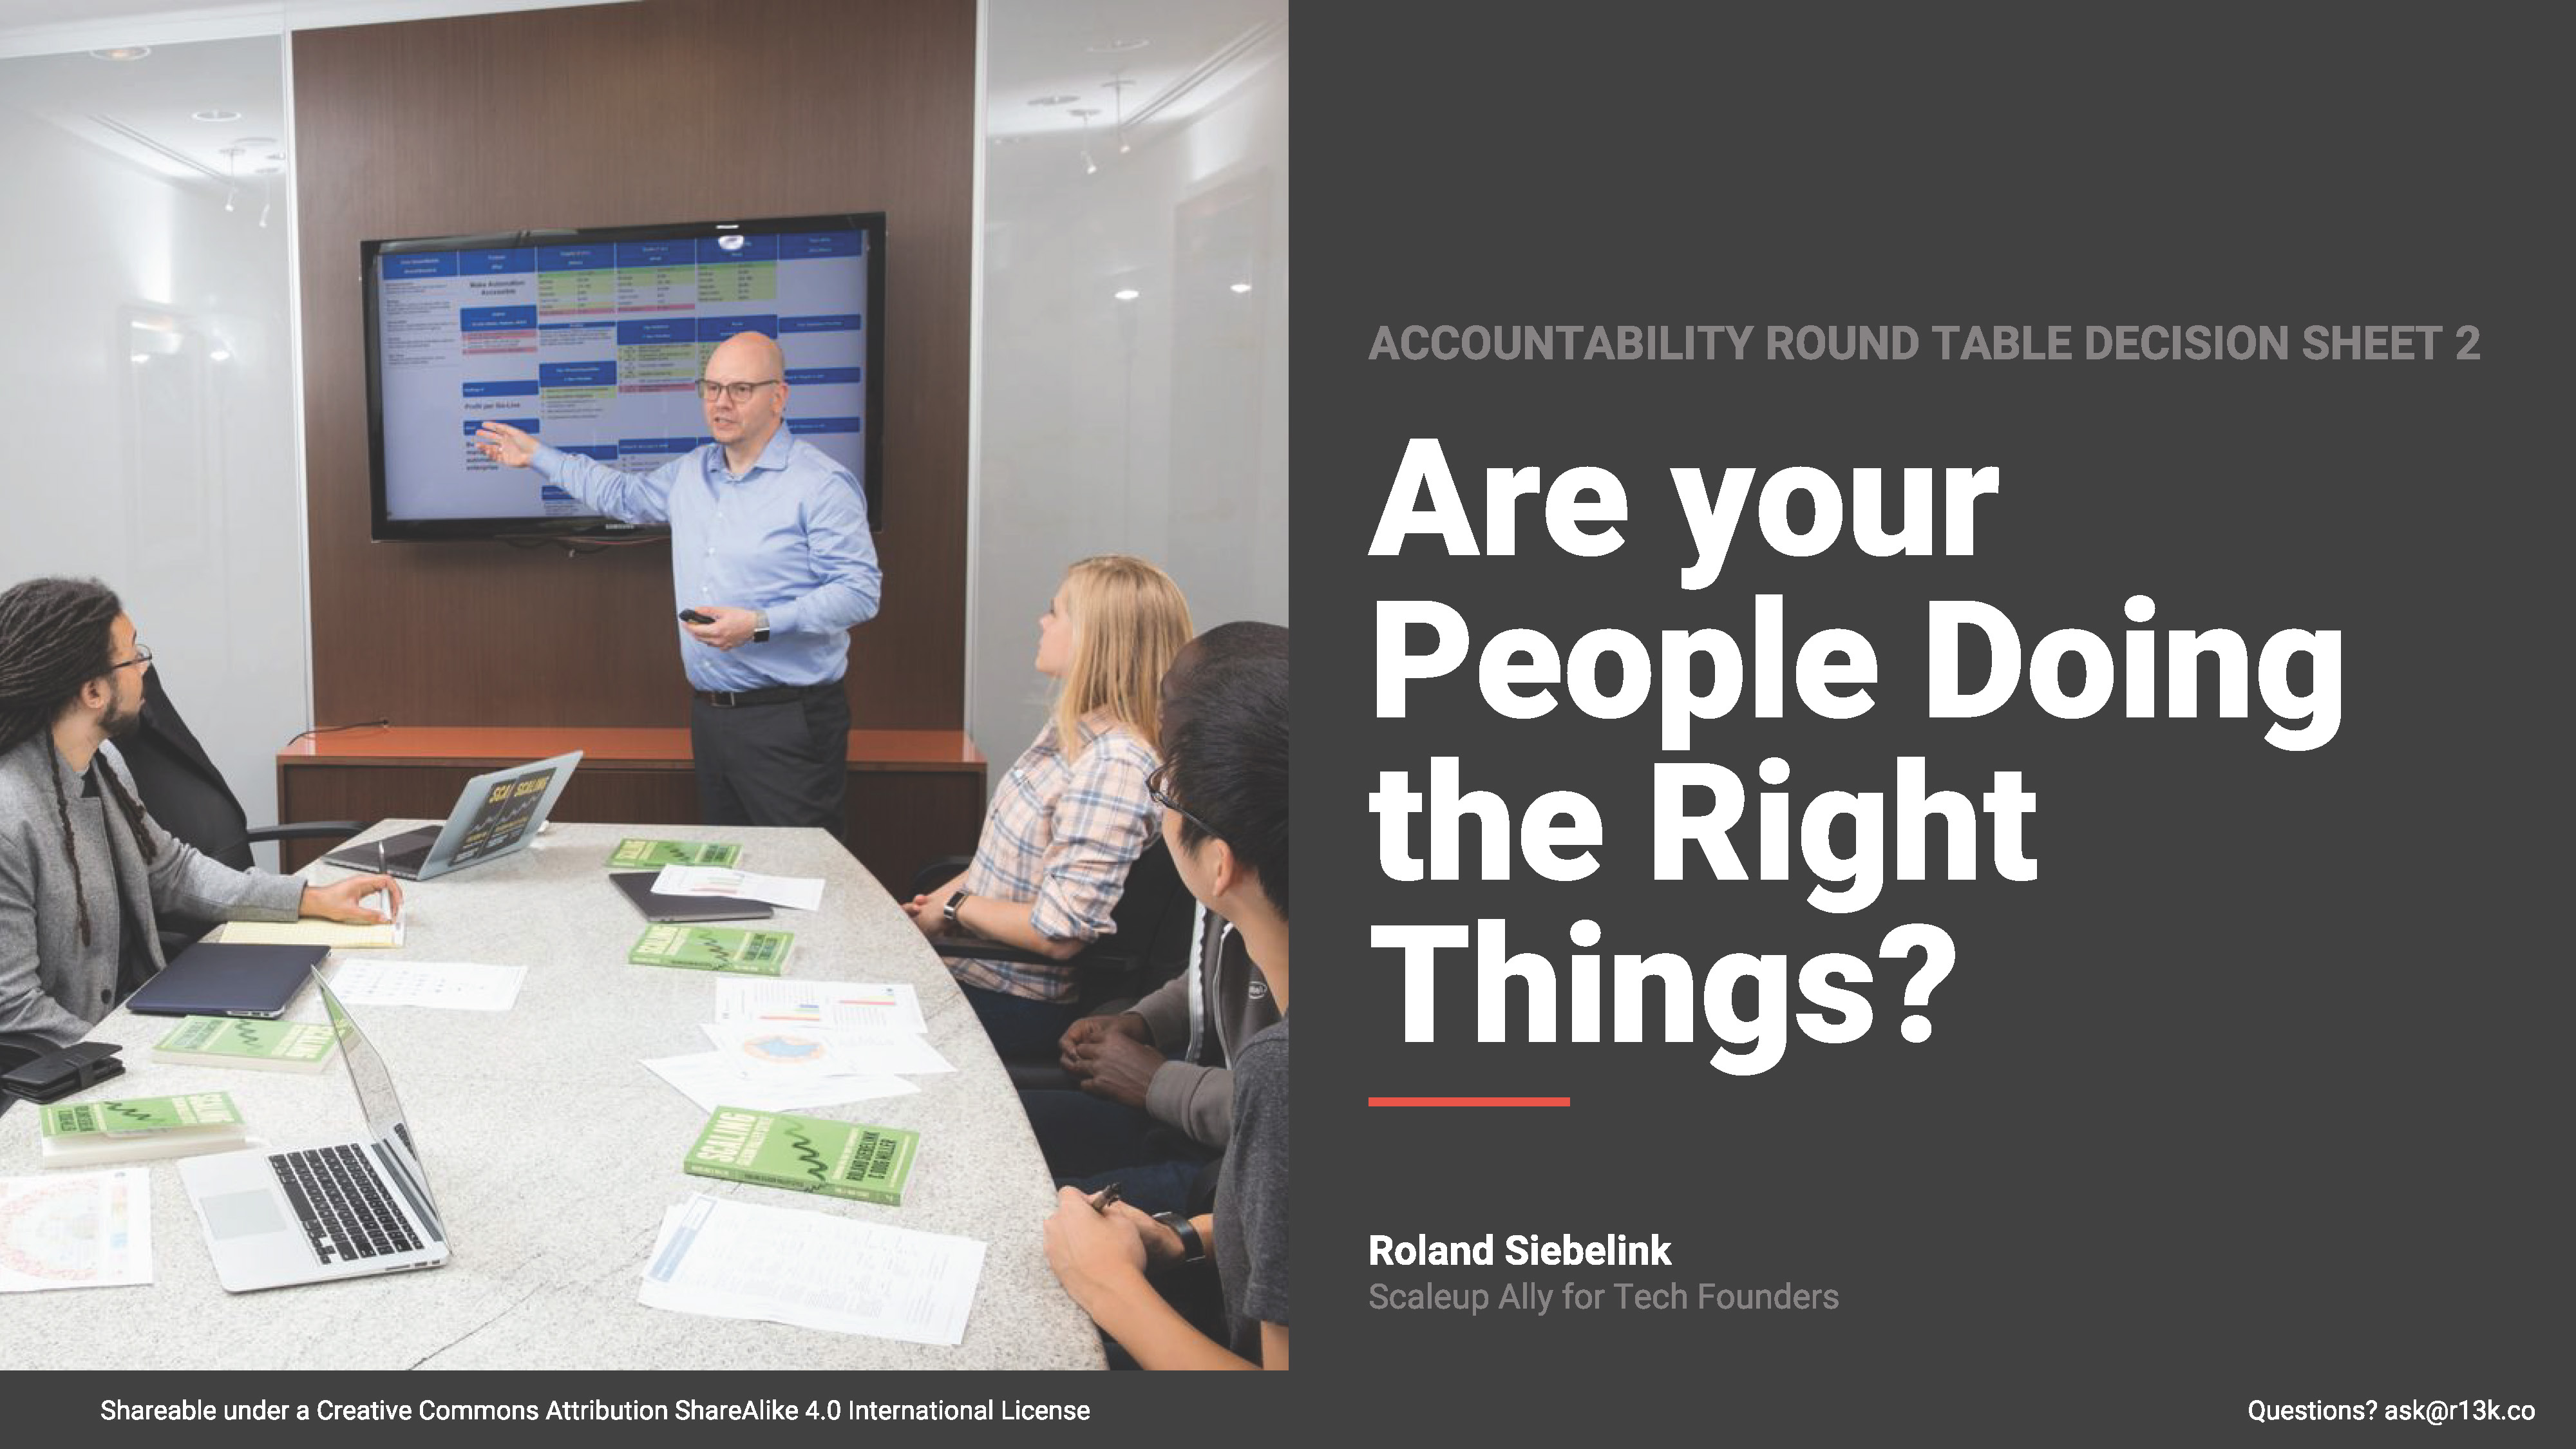 Are your People Doing the Right Things? Accountability Roundtable: Defining Key Objectives with 'Turn X into Y by Z' Statements